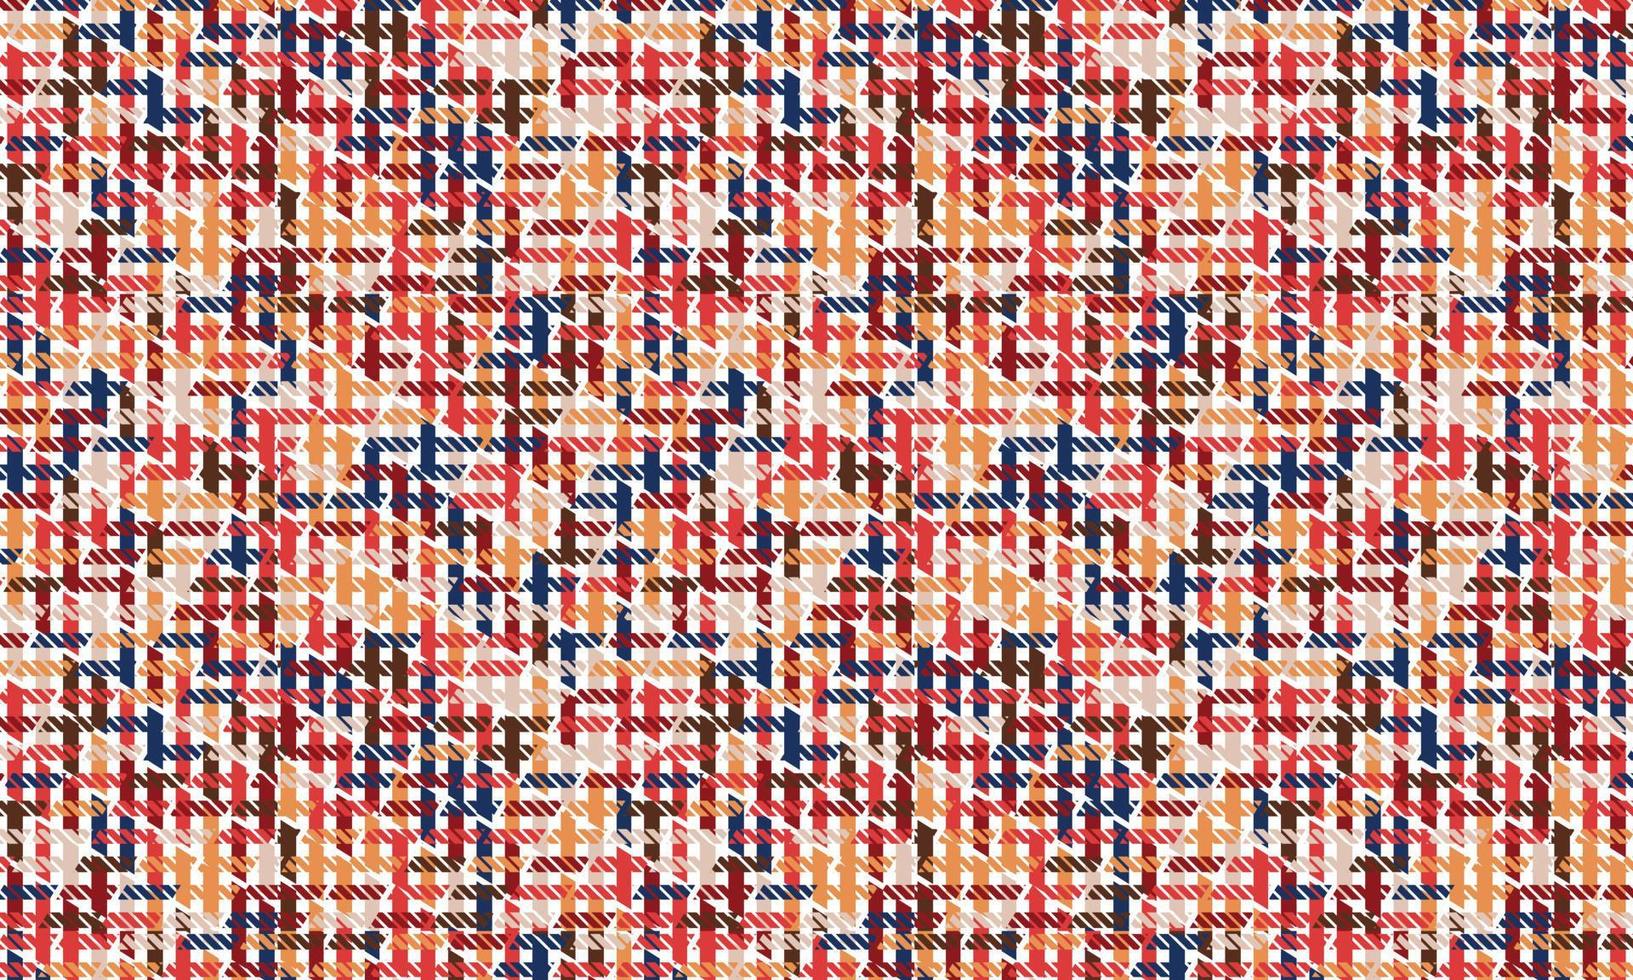 Plaid loincloth pattern colorful modern textile abstract background. vector